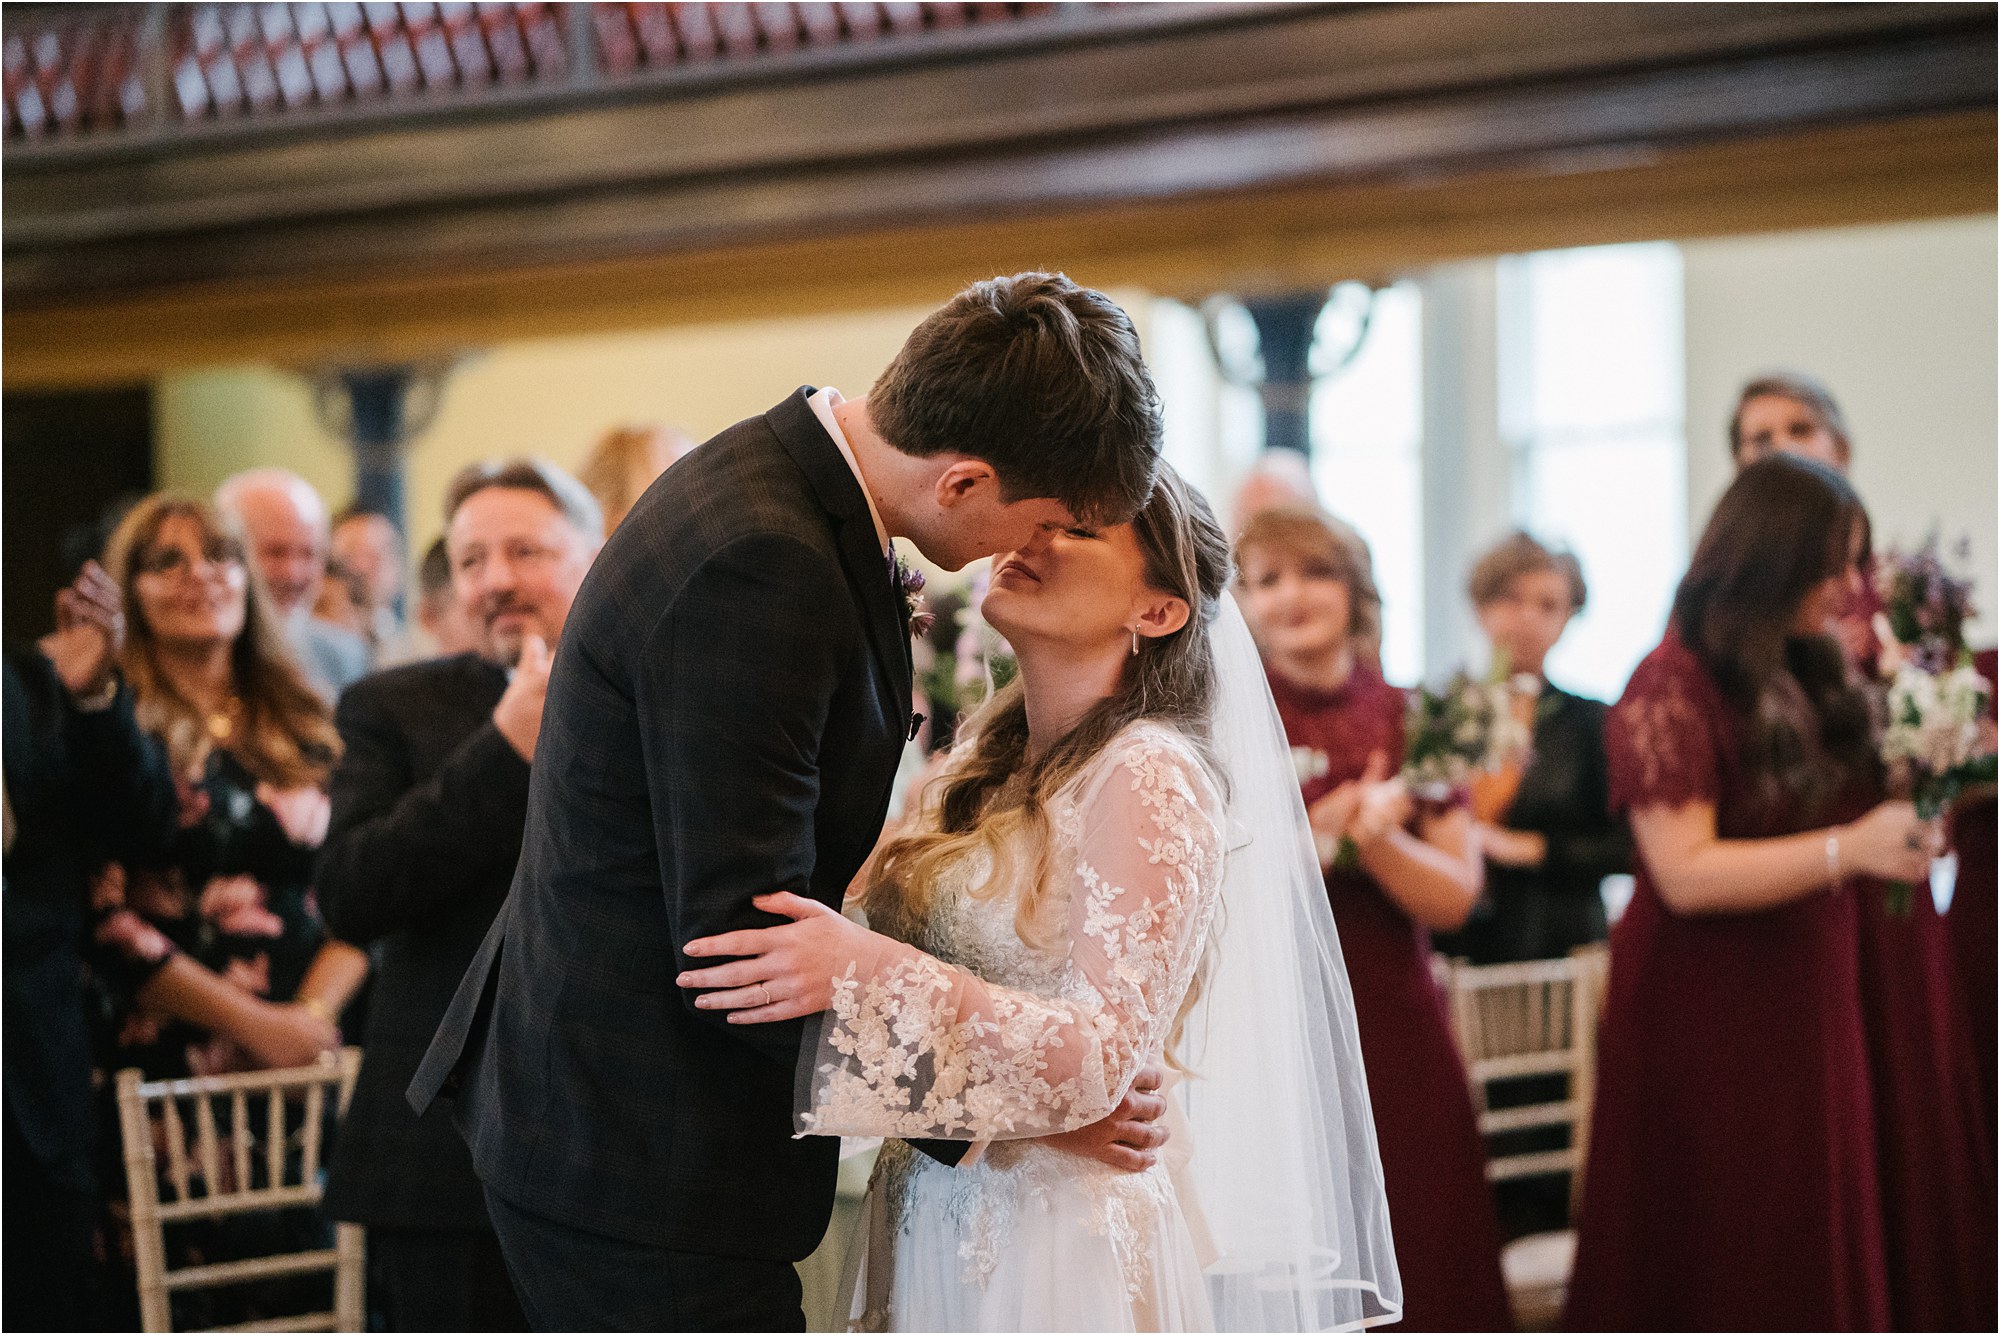 first kiss at wedding ceremony at the Round Chapel in Hackney, London